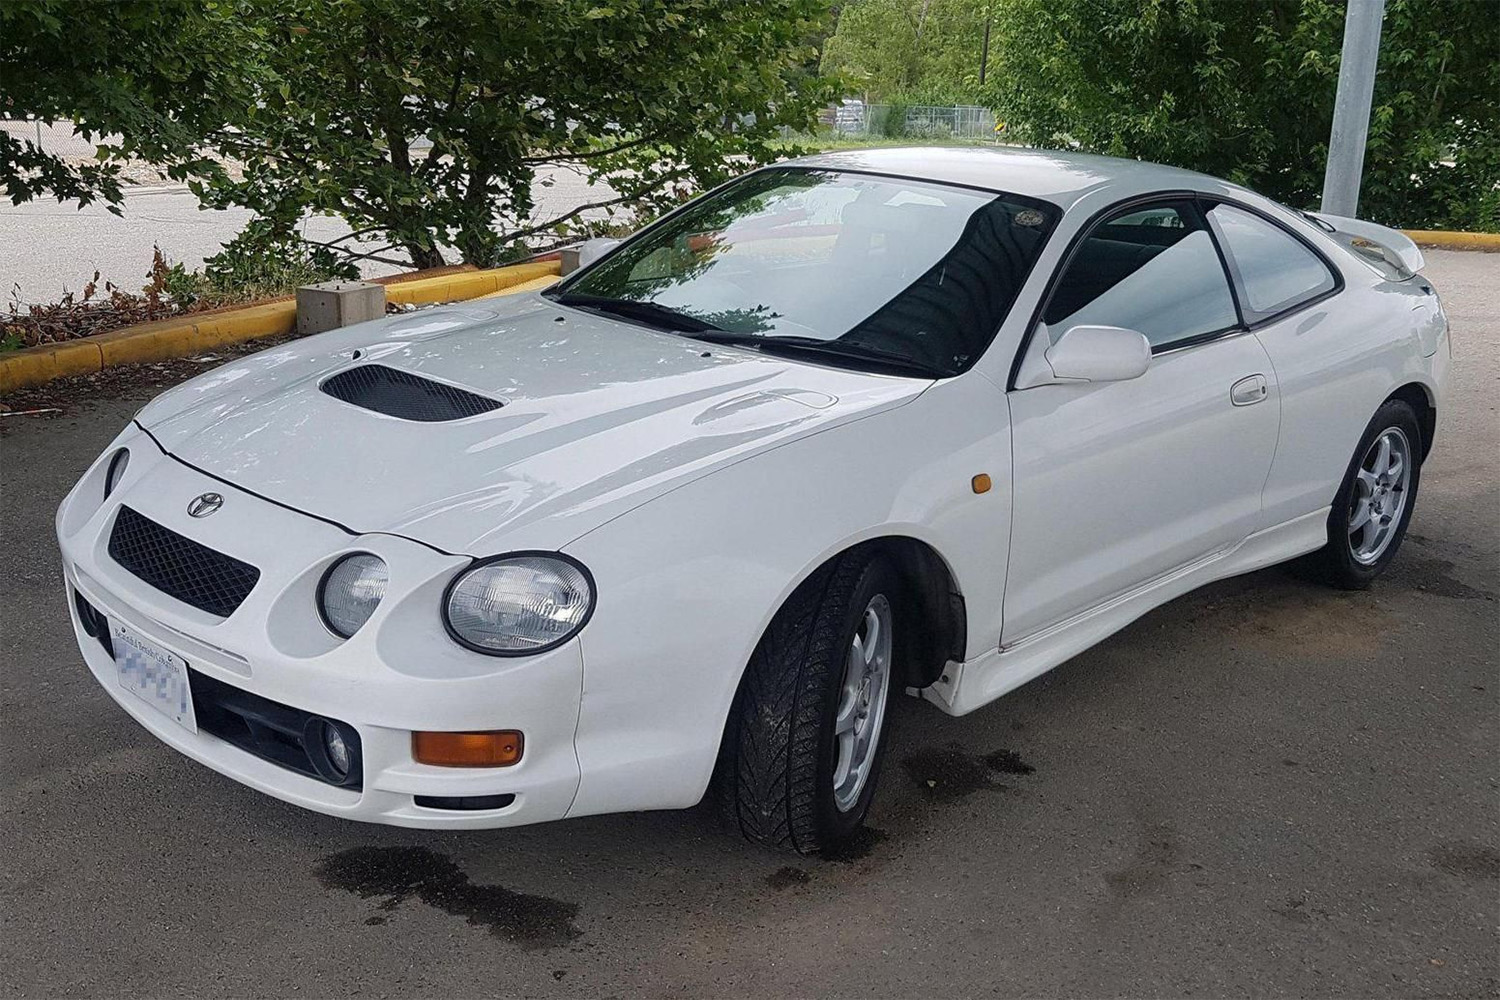 Toyota Celica GT-Four or GT4 for sale on Cars and Bids in white, front passenger side shot